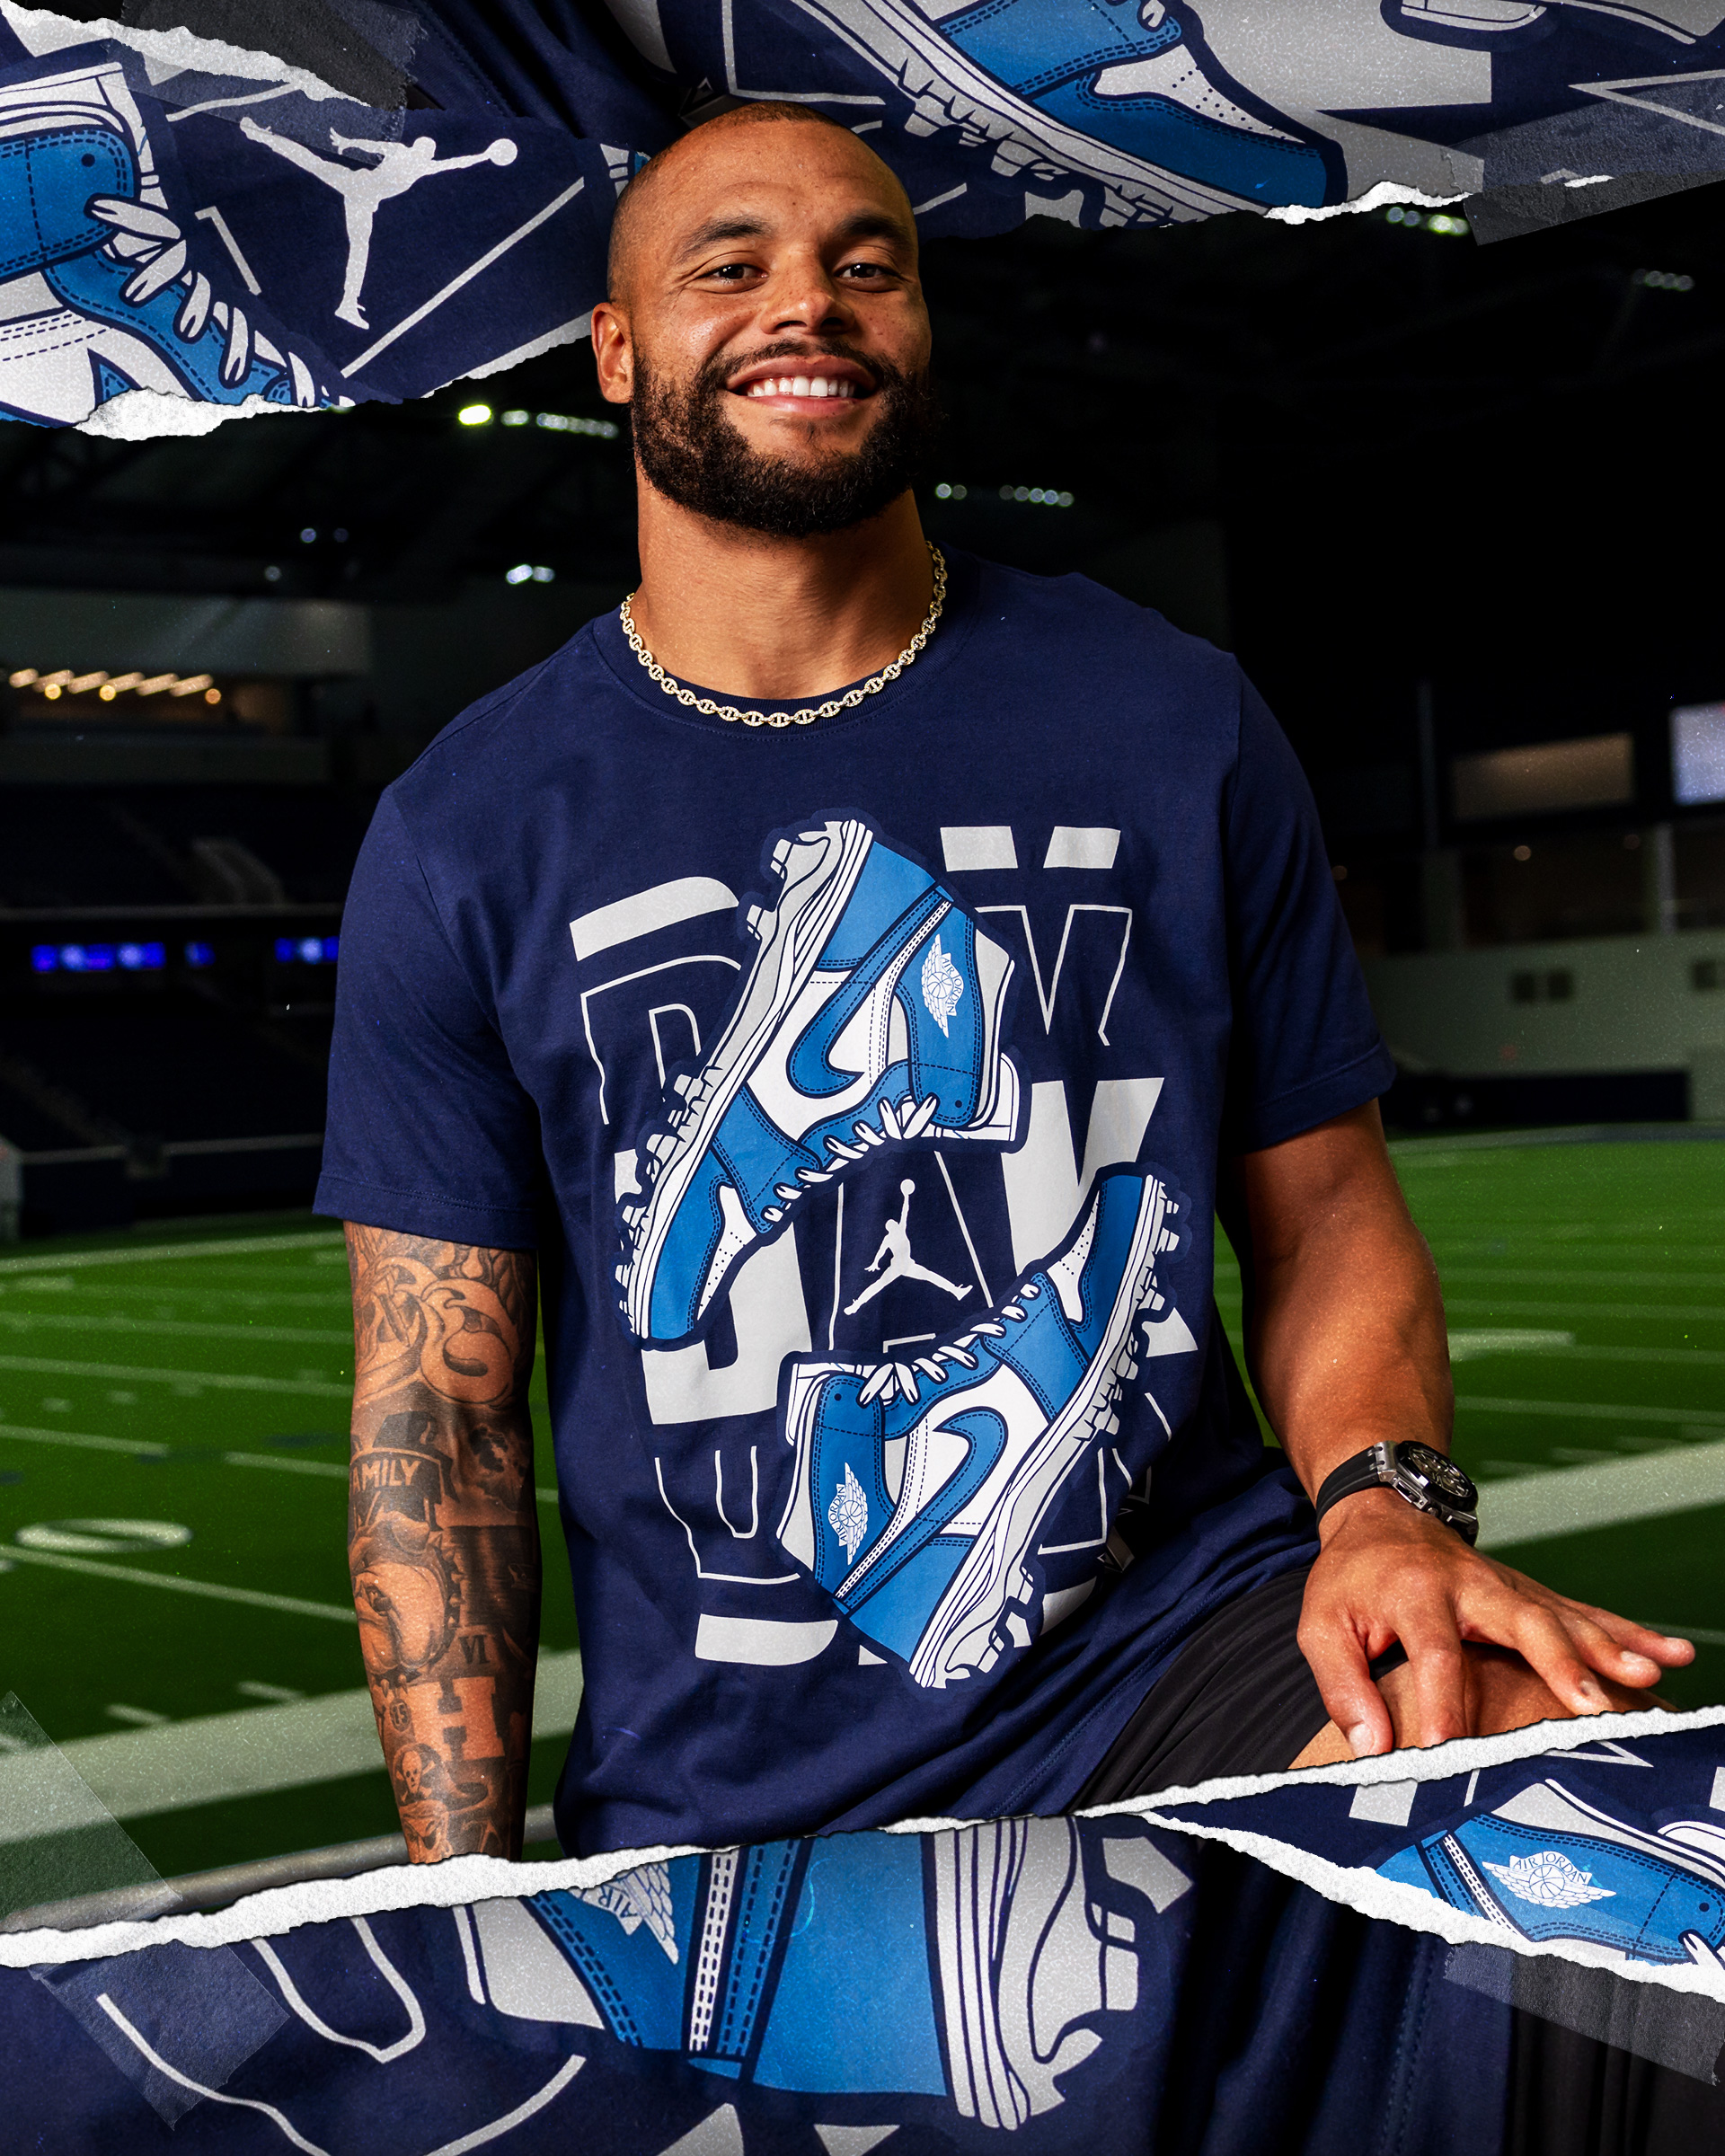 Dallas Cowboys Pro Shop - Made for coaches, players and YOU! The